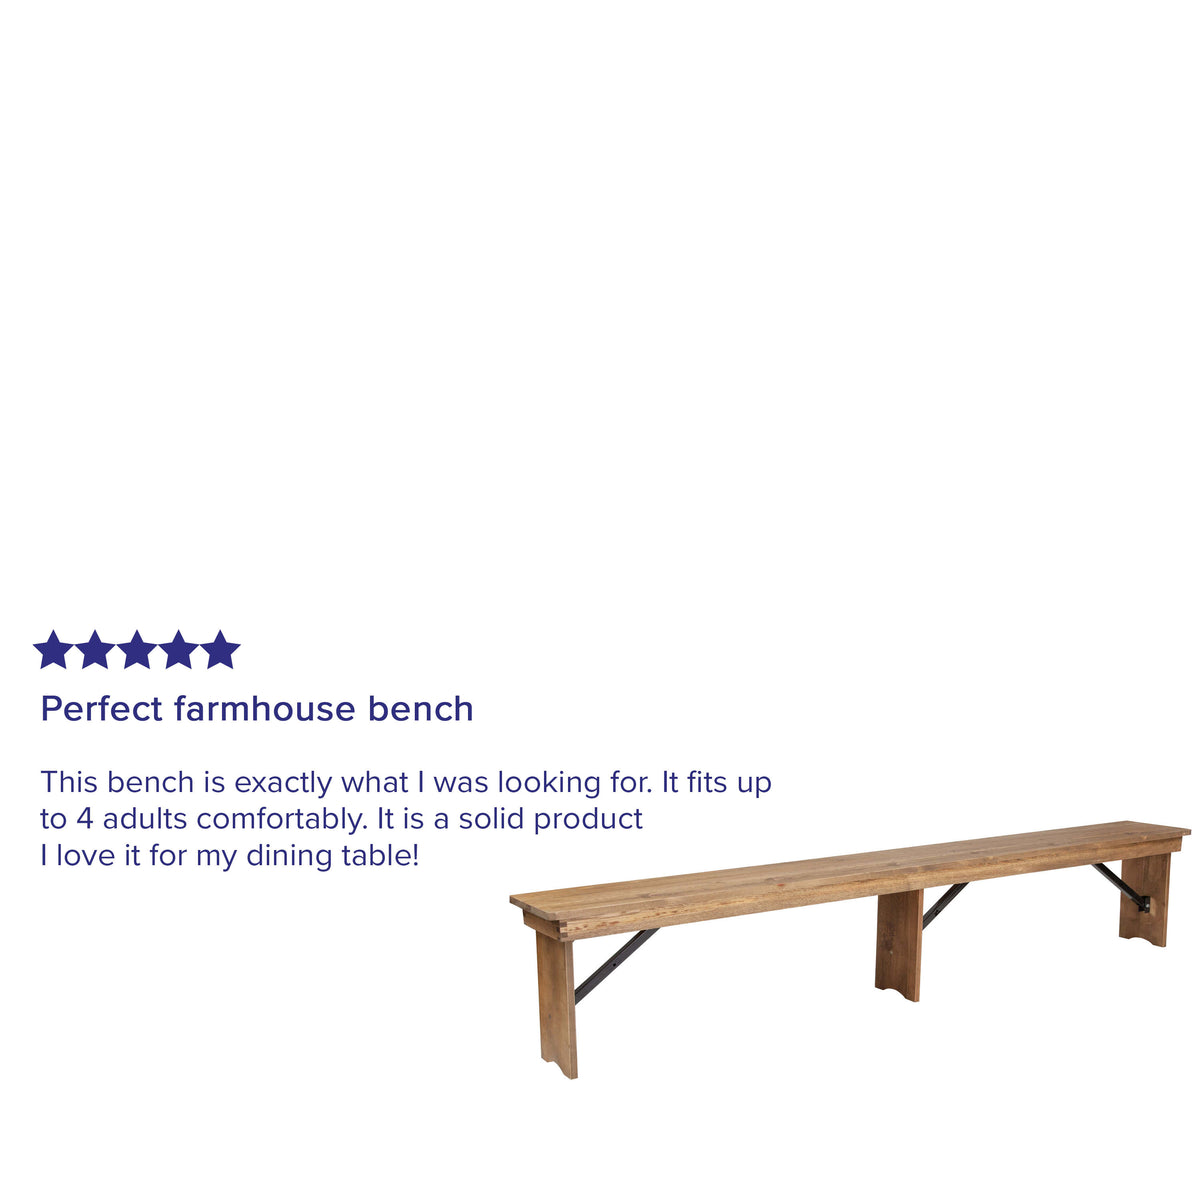 Antique Rustic |#| 8' x 12inch Antique Rustic Solid Pine Folding Farm Bench with 3 Legs